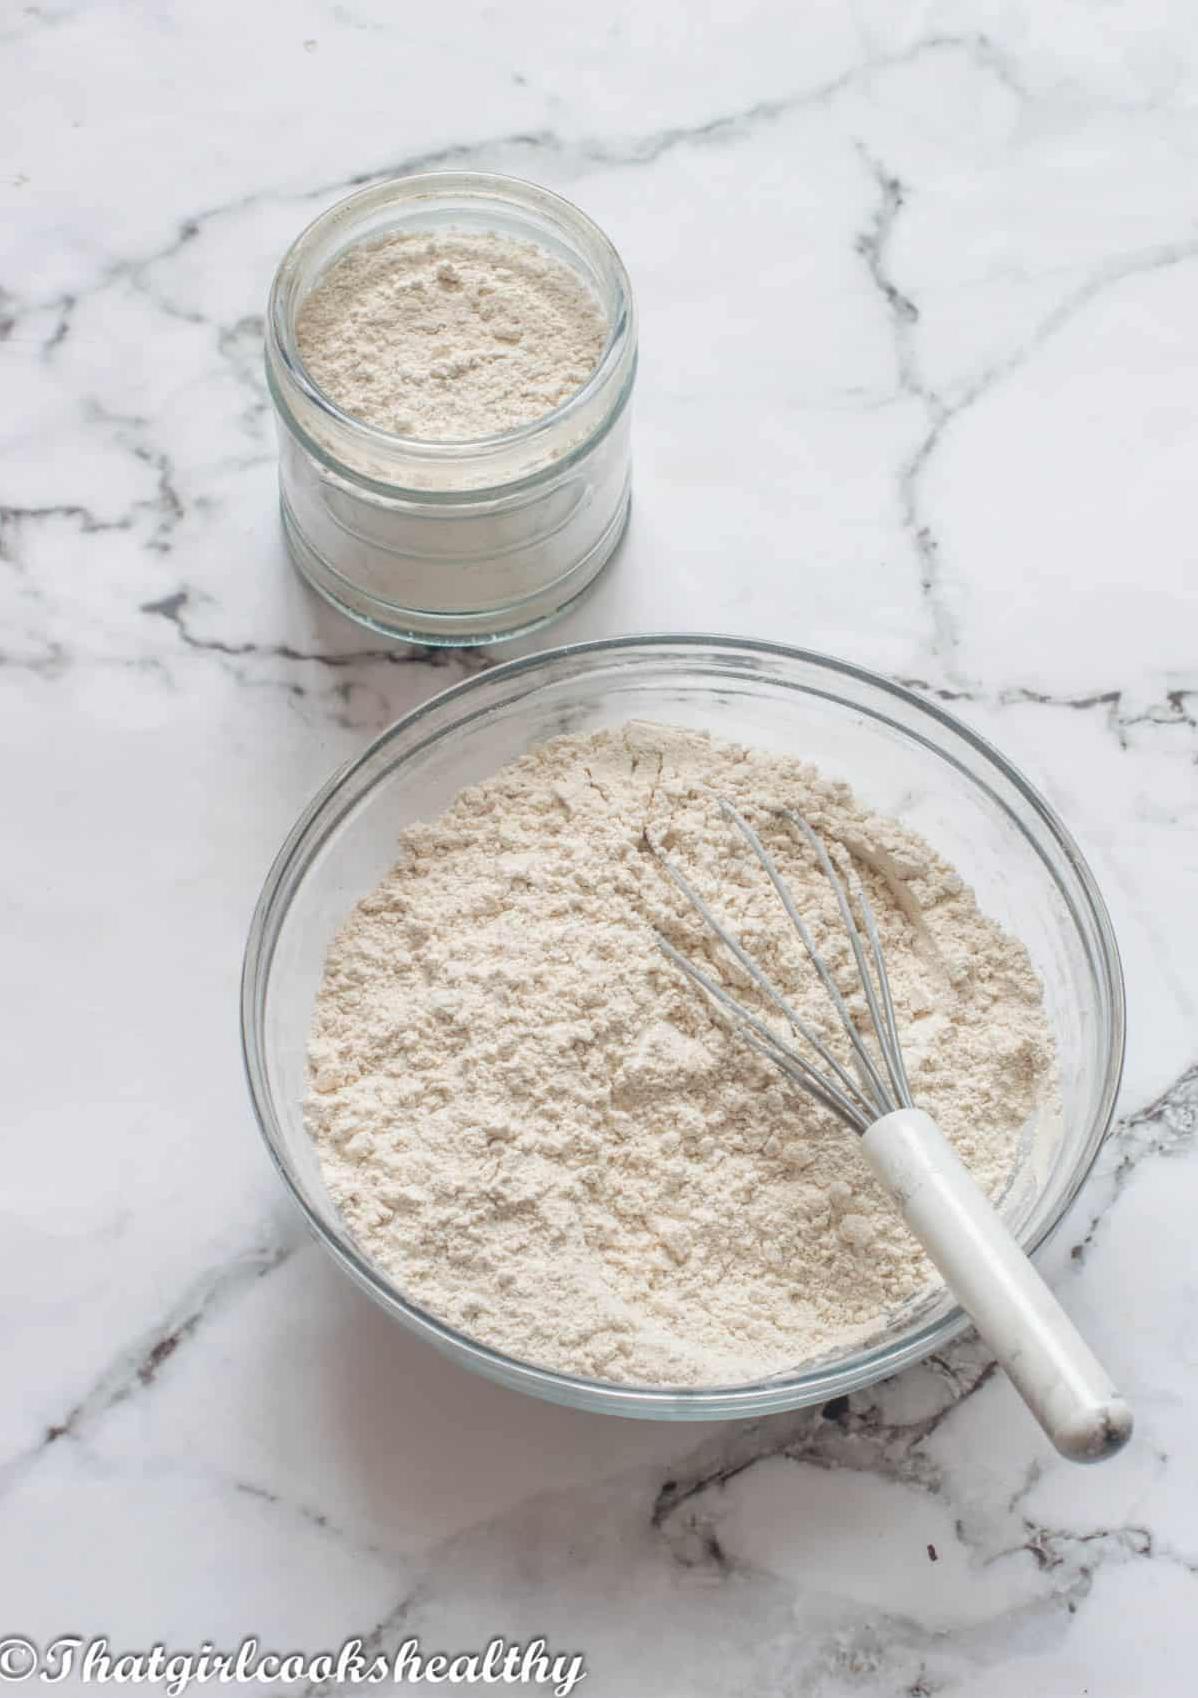 Bake Like a Pro with This Easy Gluten-Free Flour Recipe